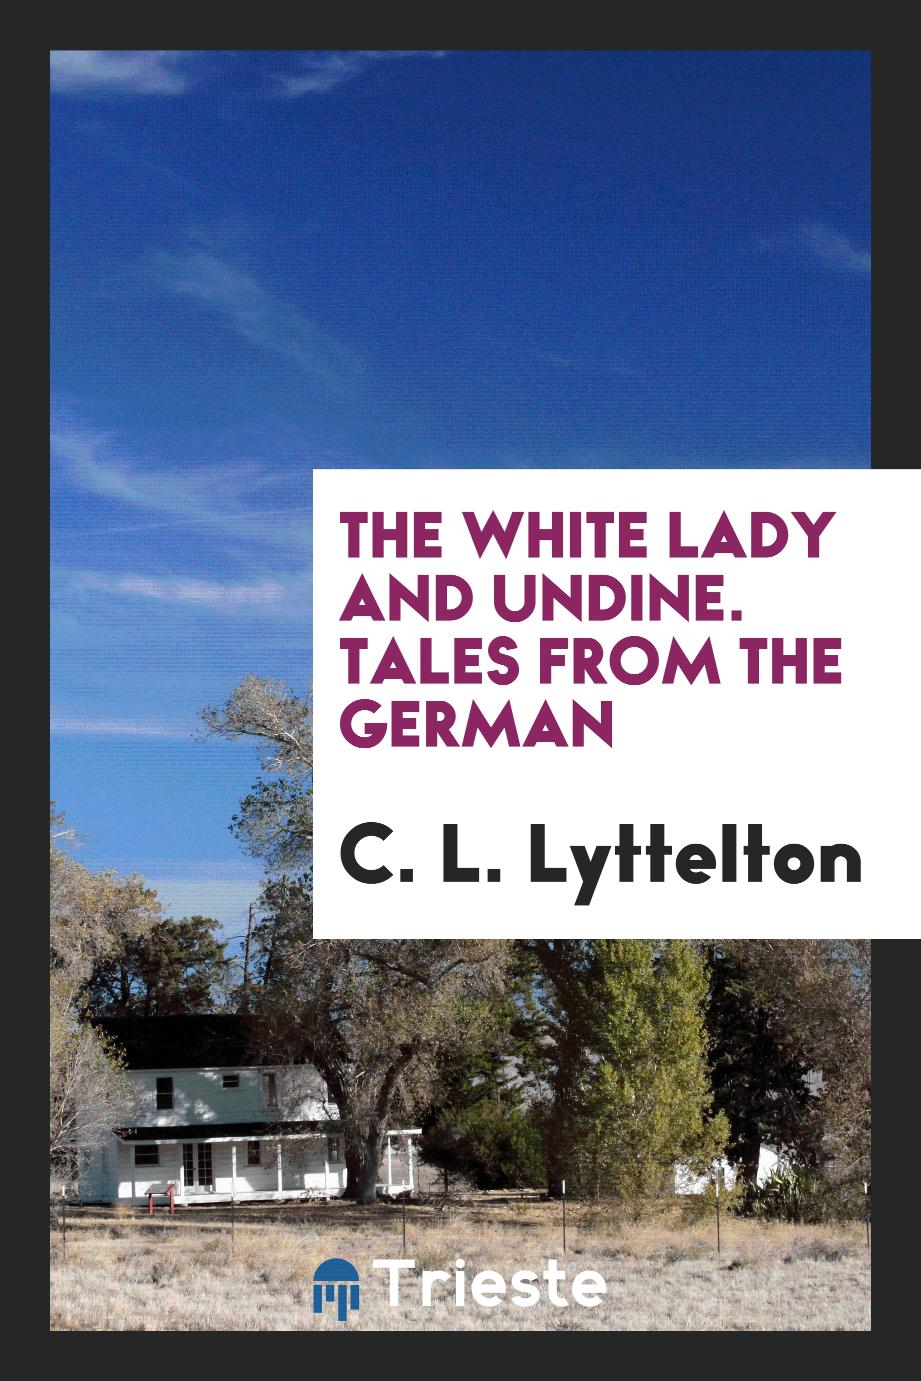 The White Lady and Undine. Tales from the German